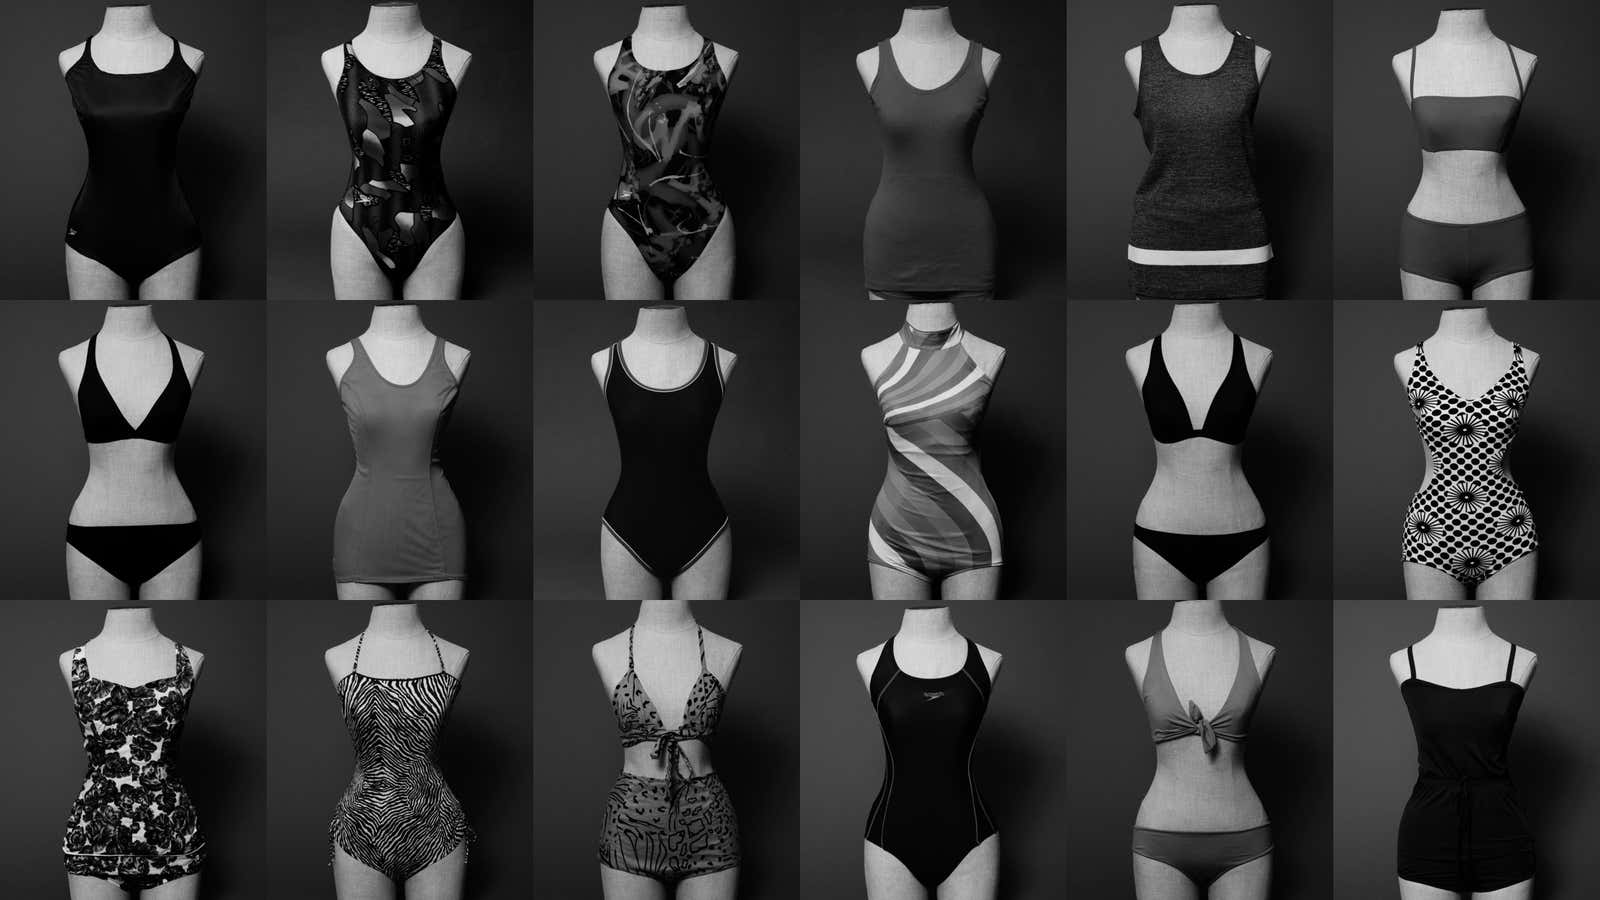 A sampling of Leanne Shapton’s swimsuits.